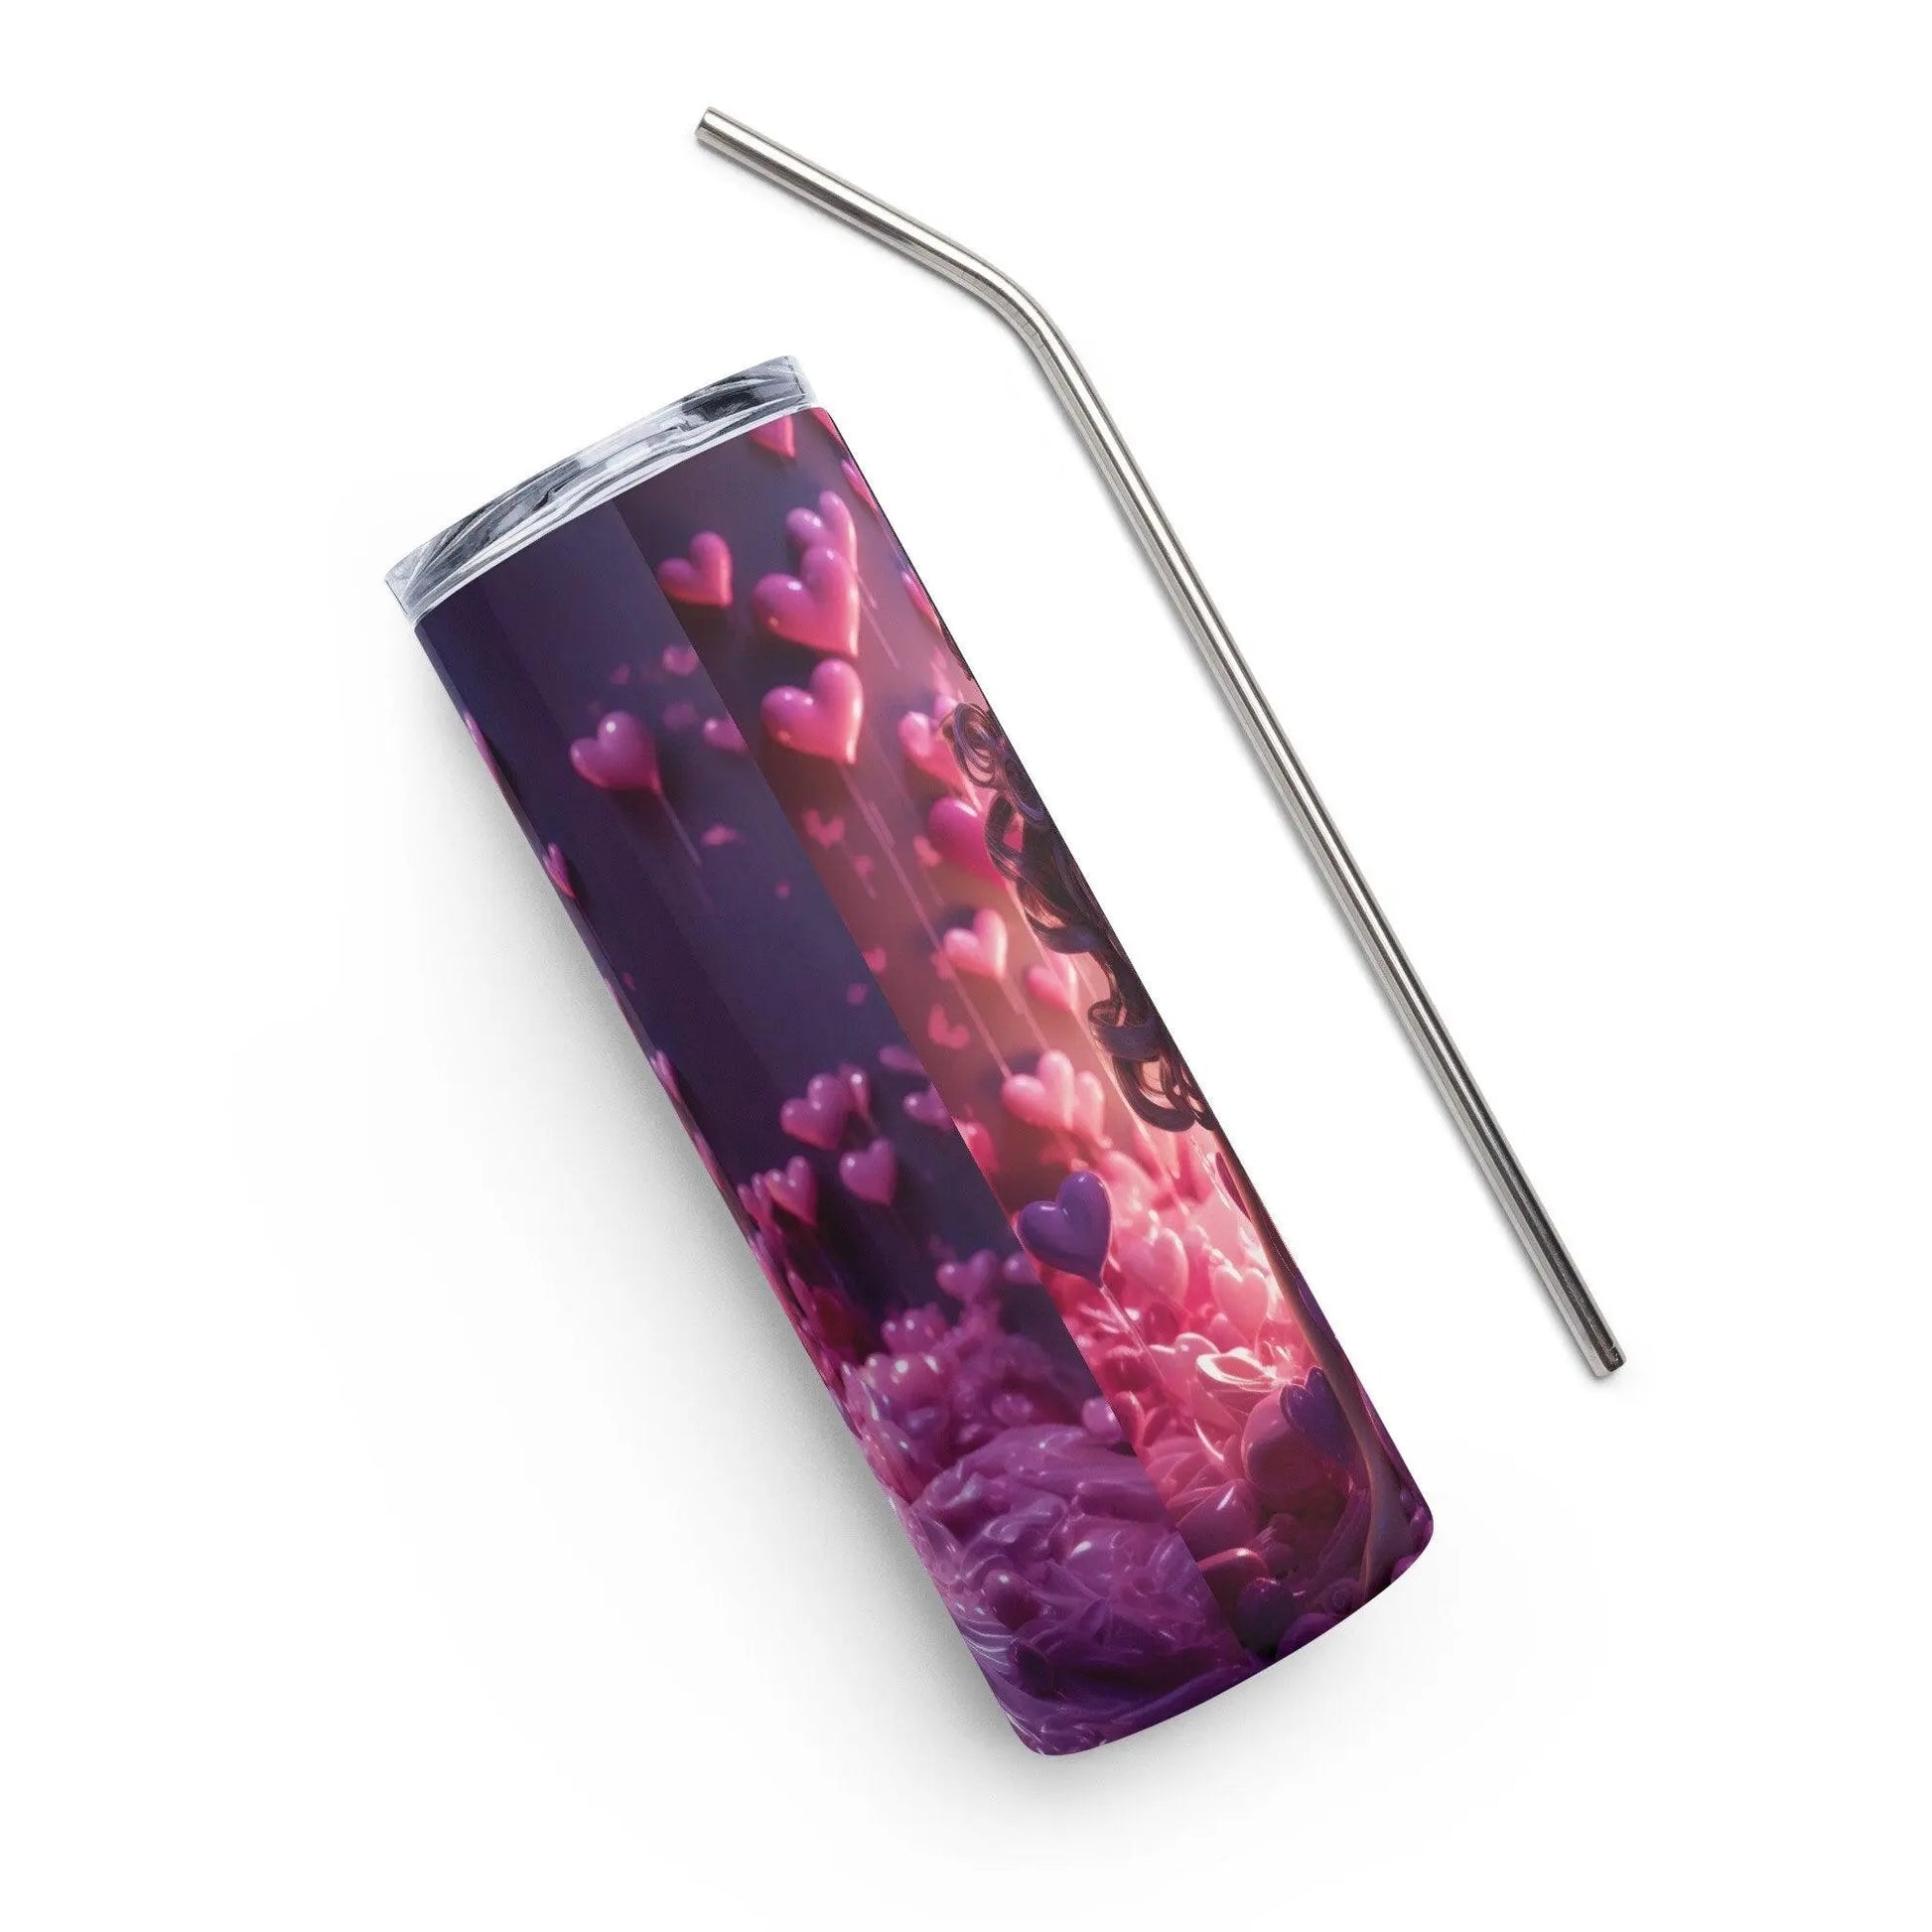 Elegant Barbie Stainless Steel Tumbler - Whimsical Patterns & Floating Hearts - Hot and Cold Drinks On the Go!